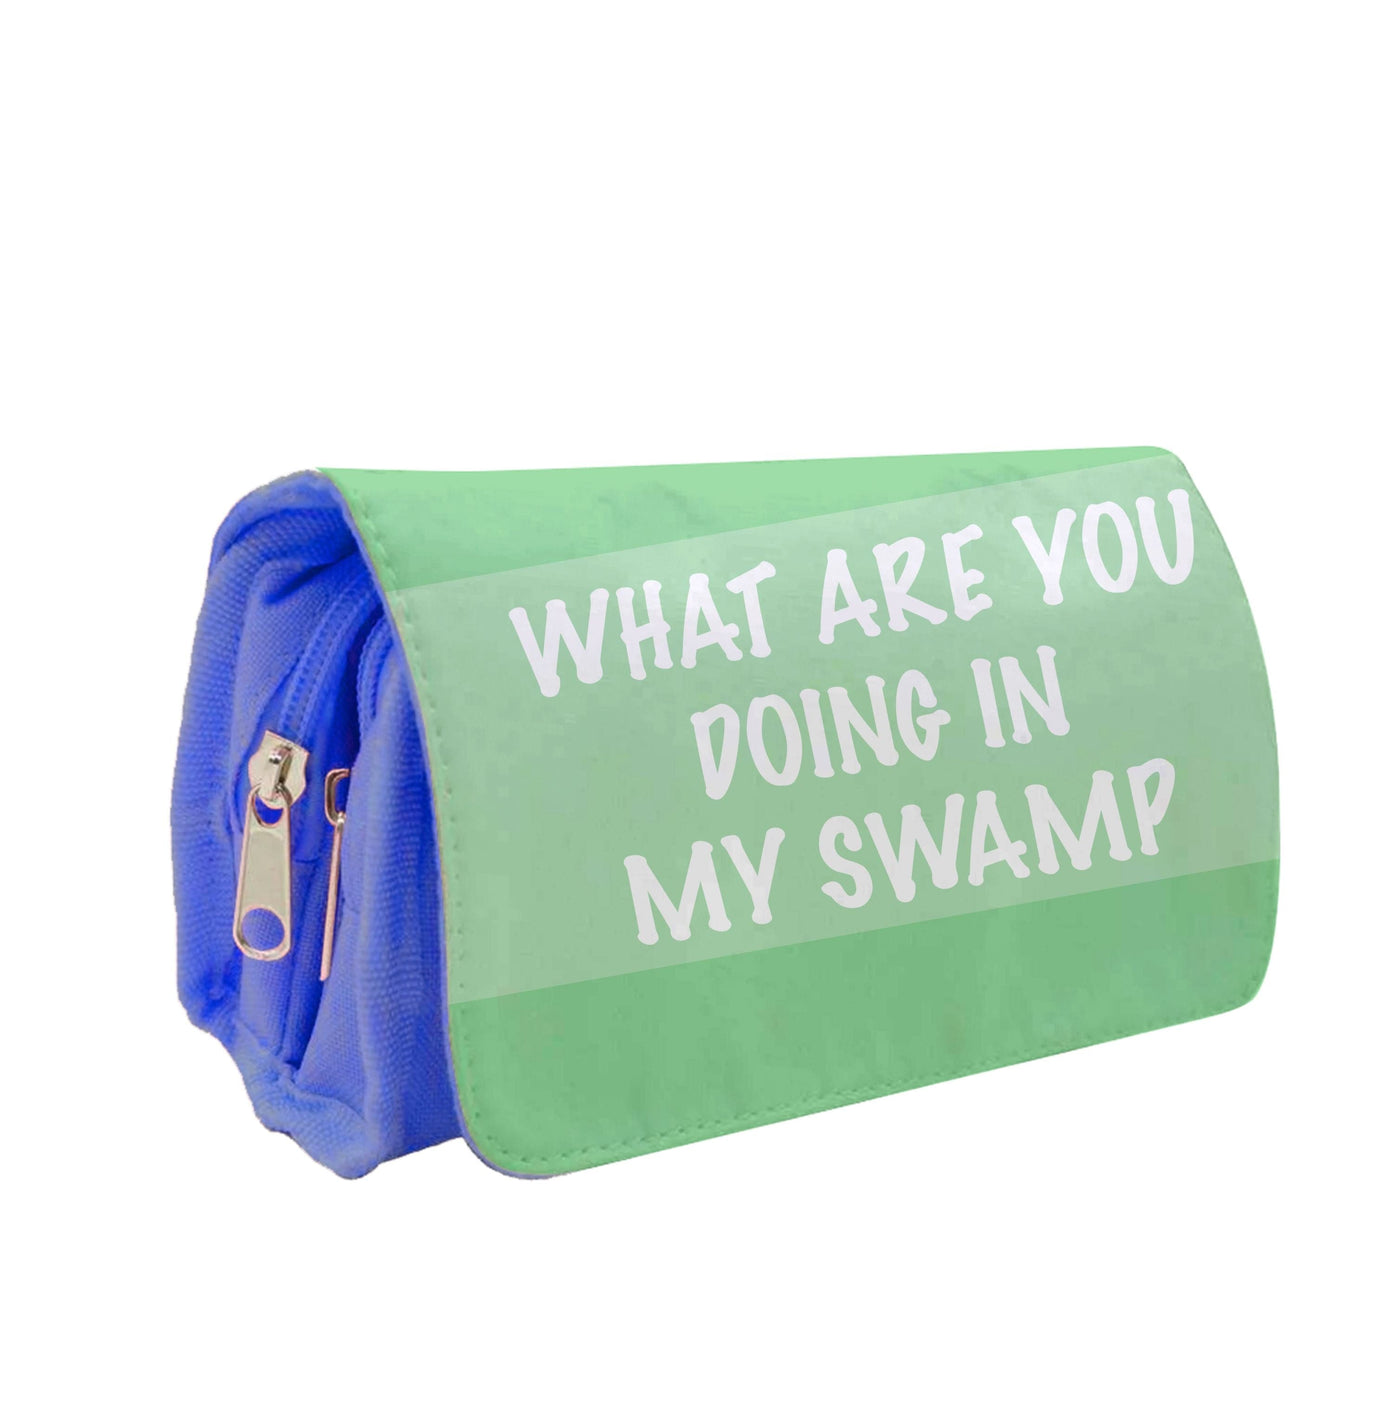 What Are You Doing In My Swamp - Shrek Pencil Case